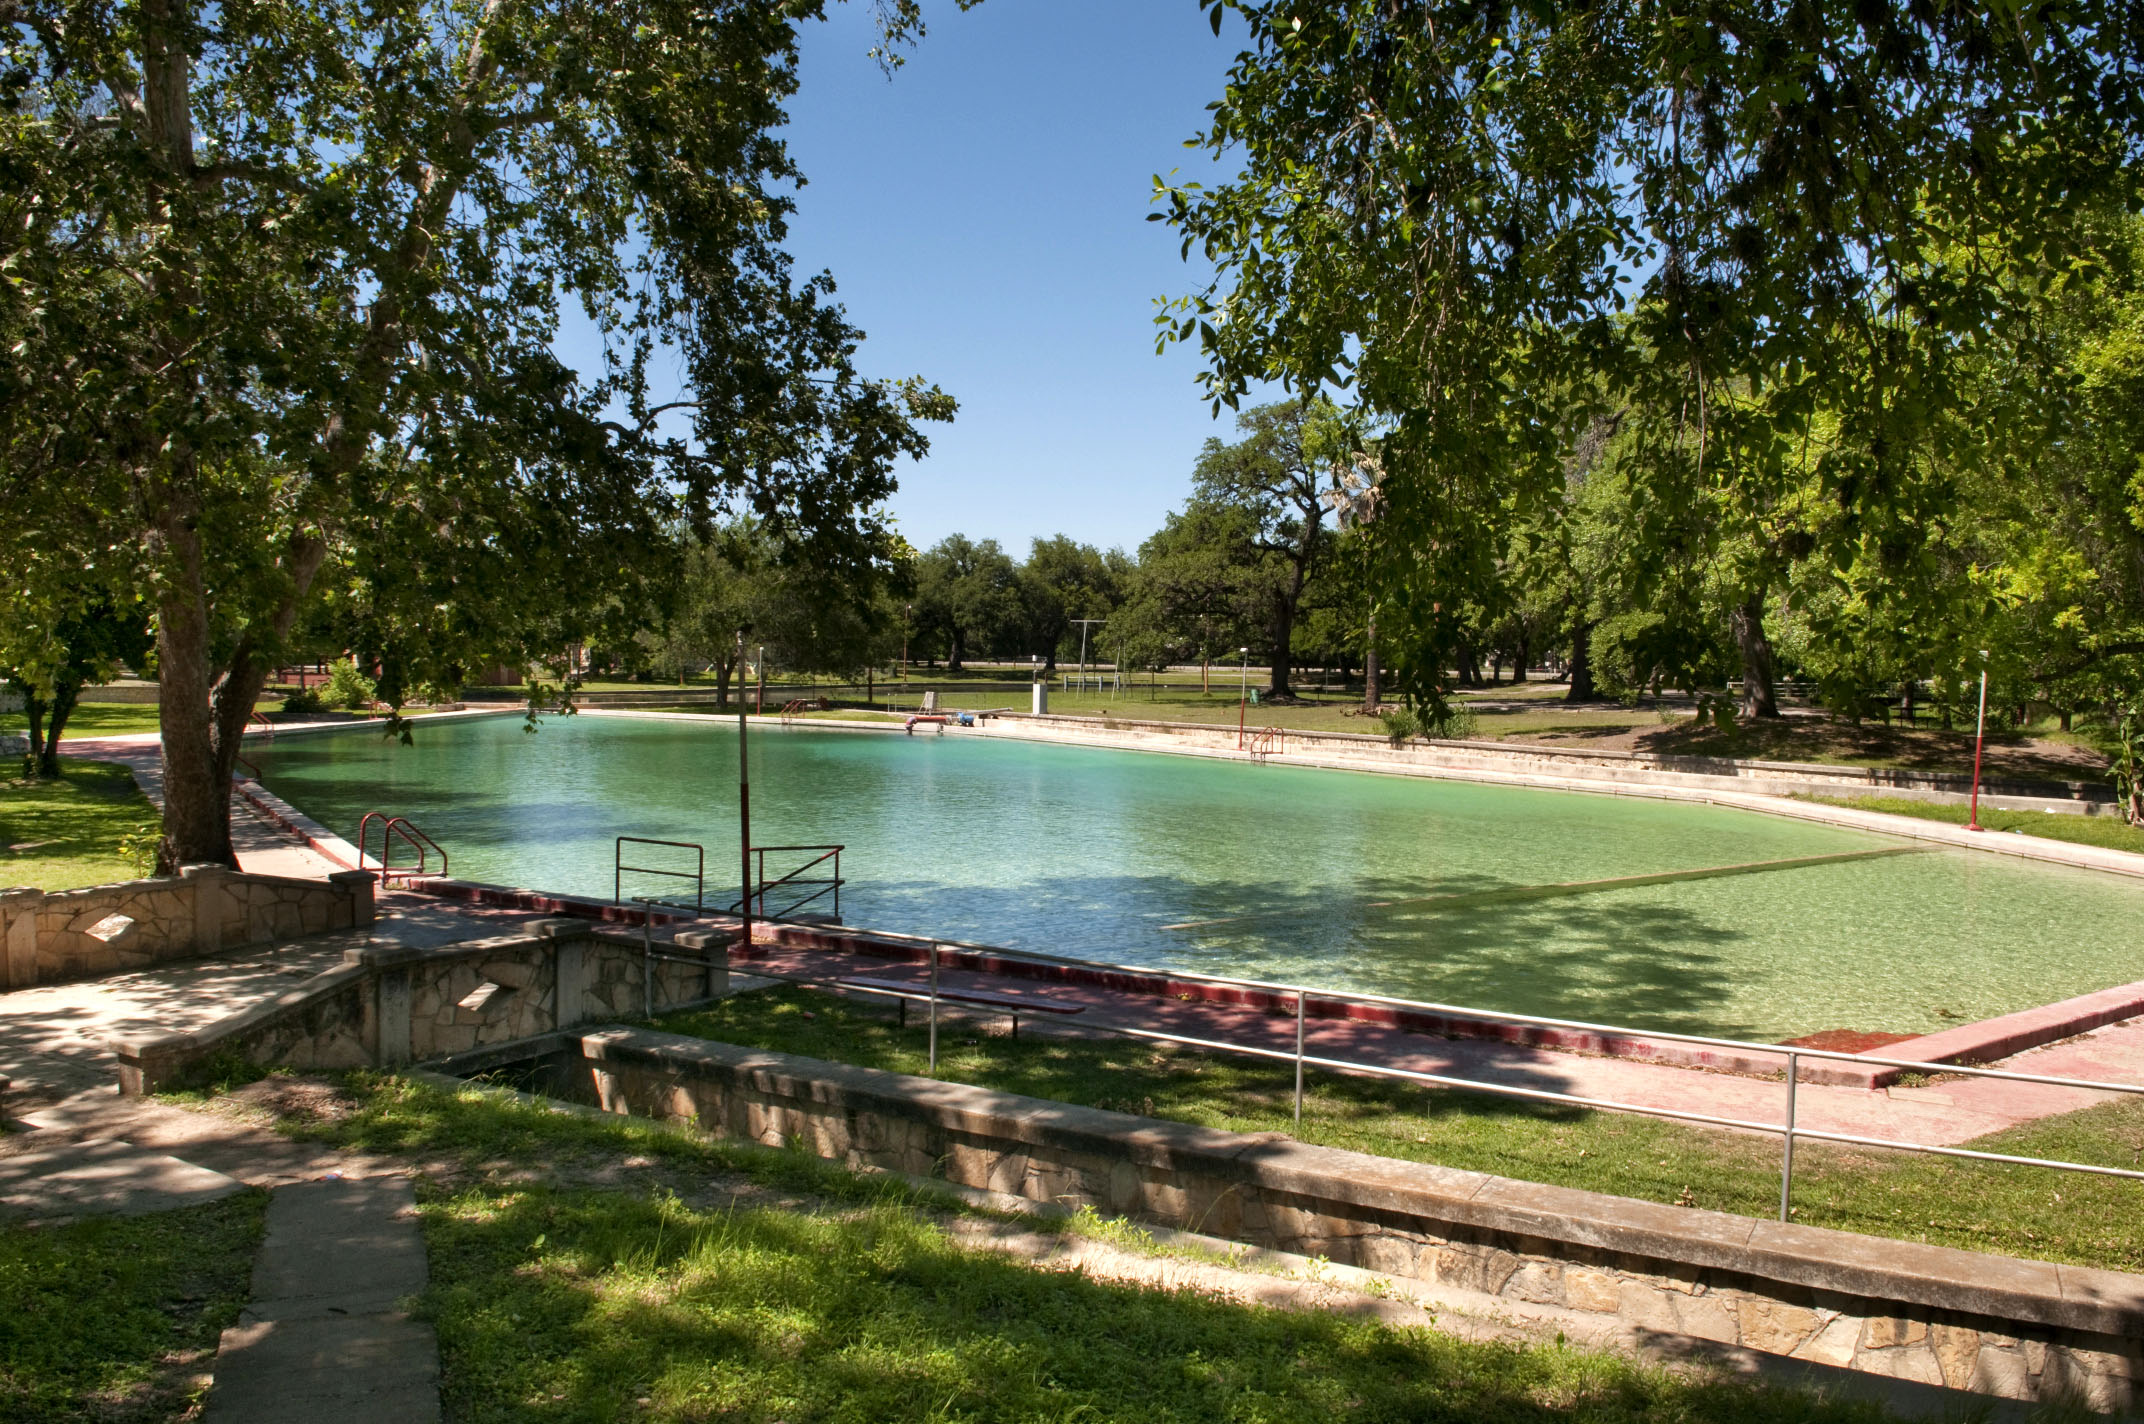 A spring fed pool surrounded by trees